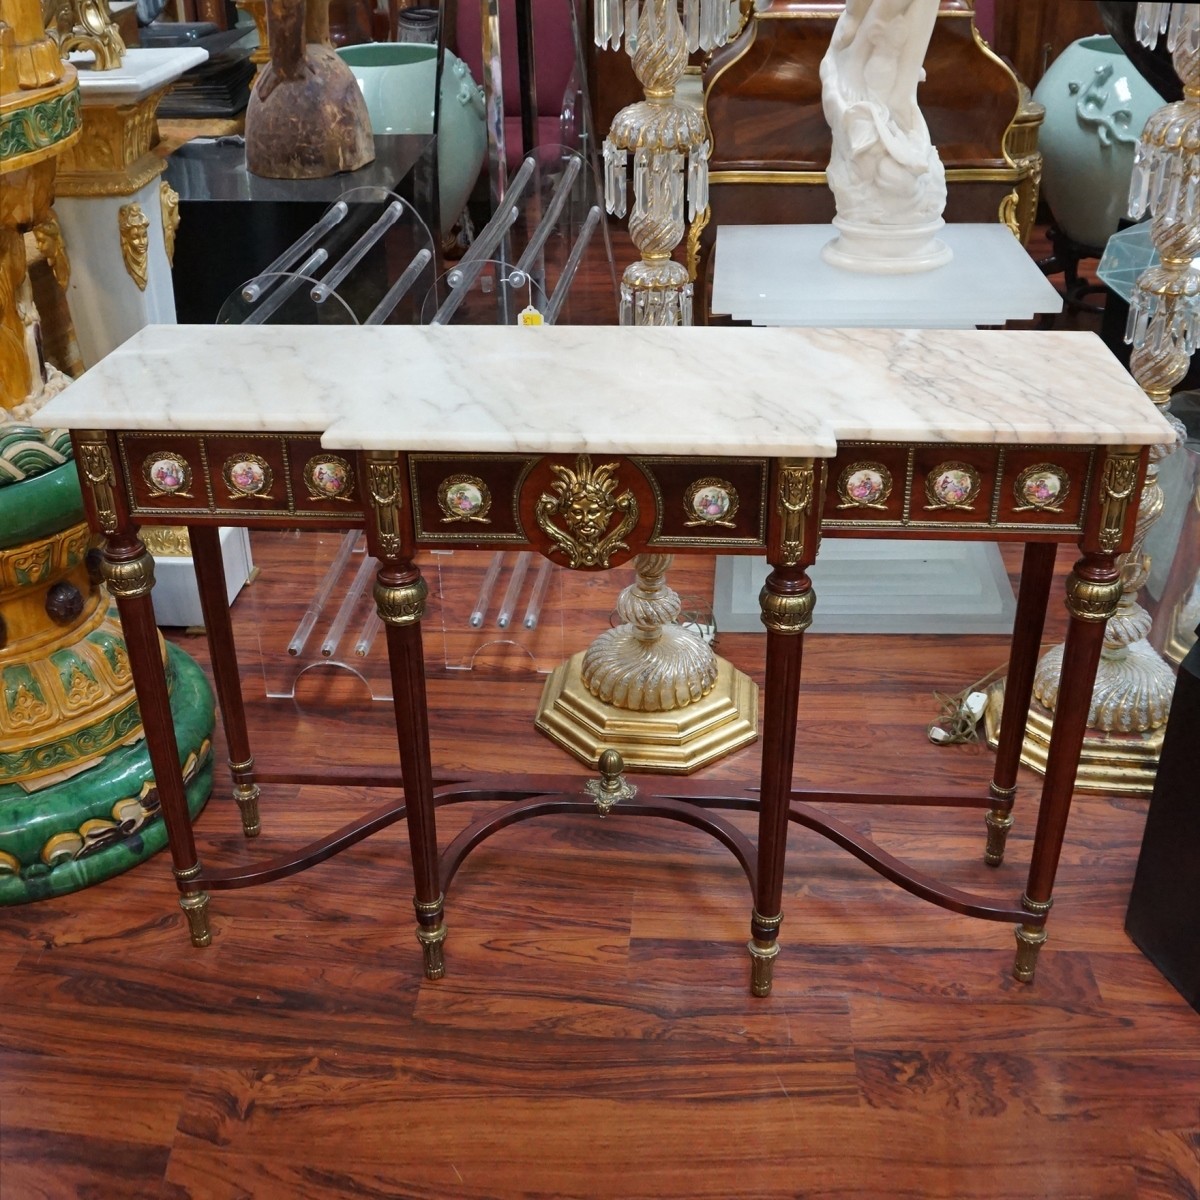 Louis XV Style Console and Mirror